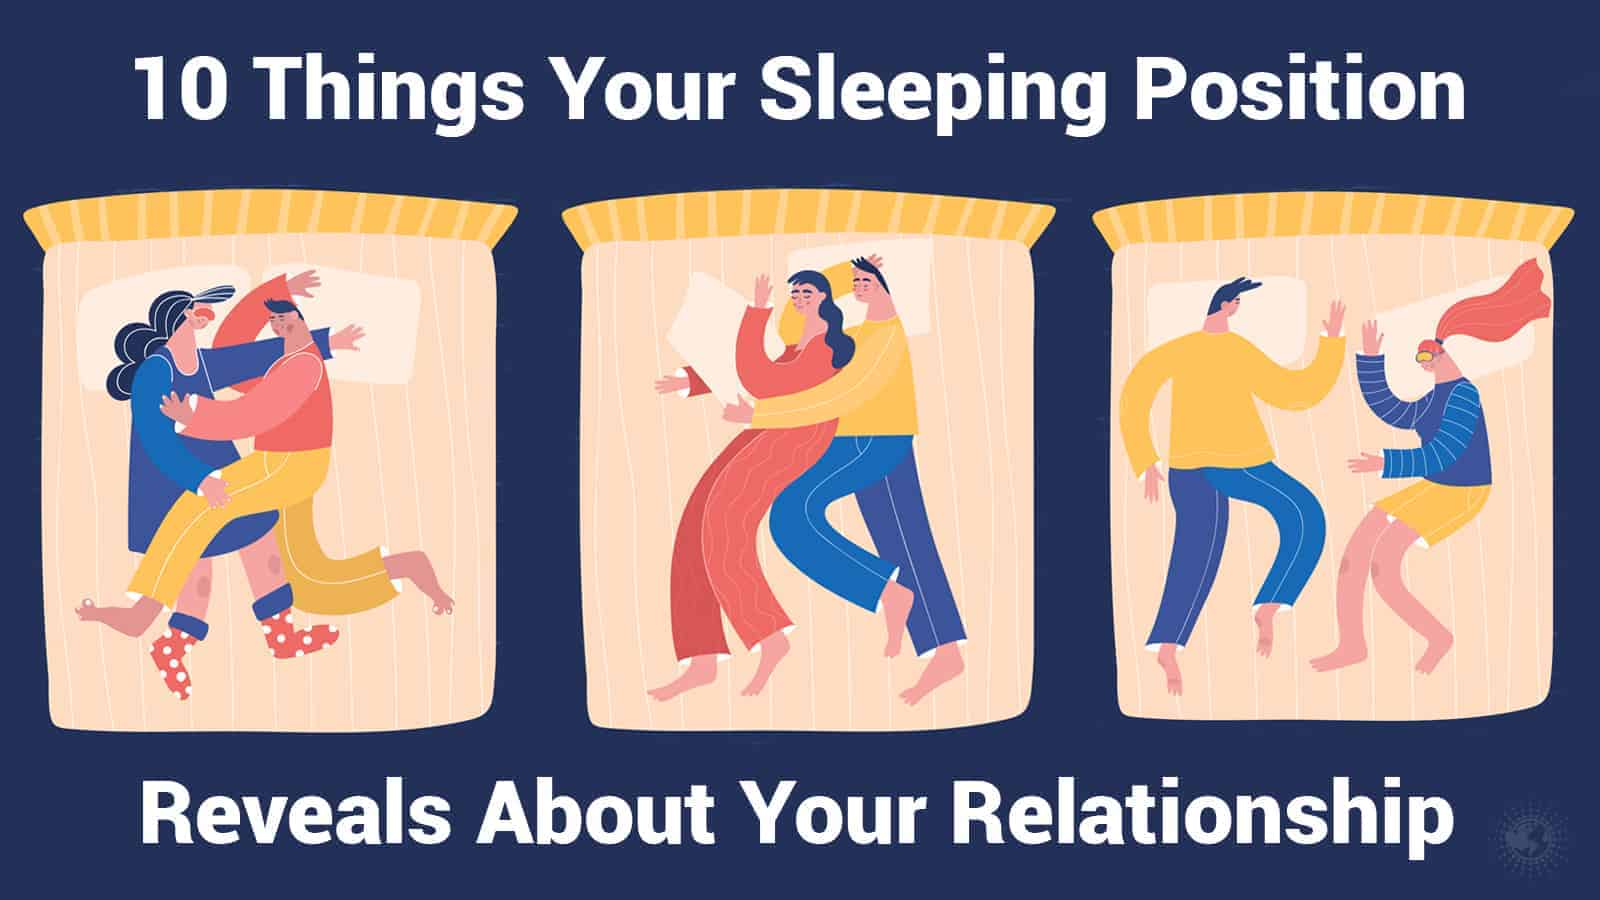 10 Things Your Sleeping Position Reveals About Your Relationship